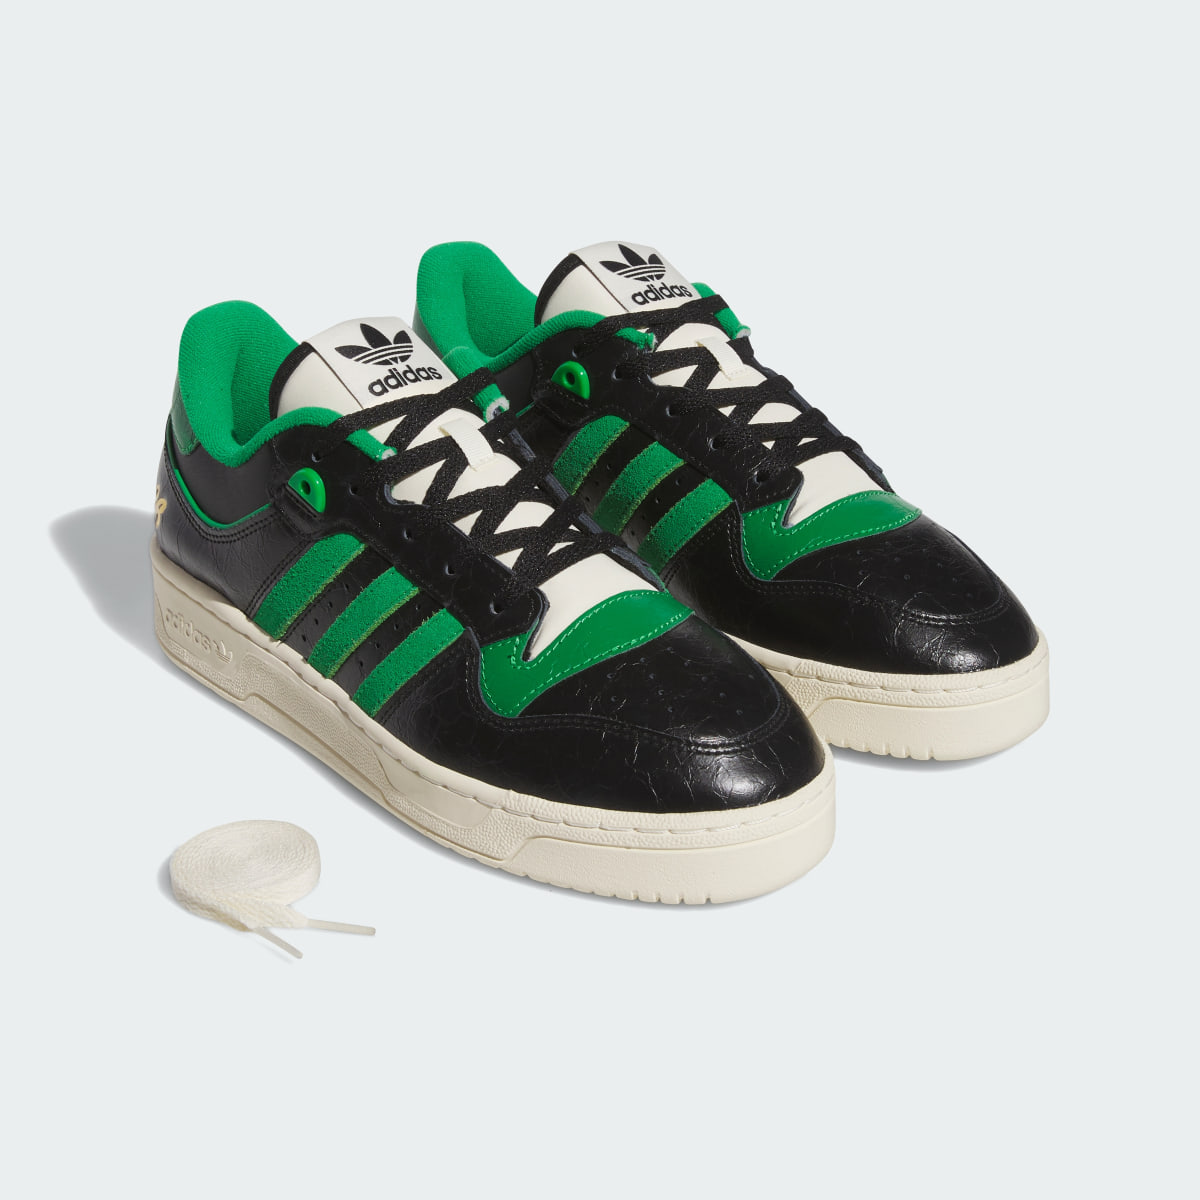 Adidas Sapatilhas Rivalry 86 Low. 10